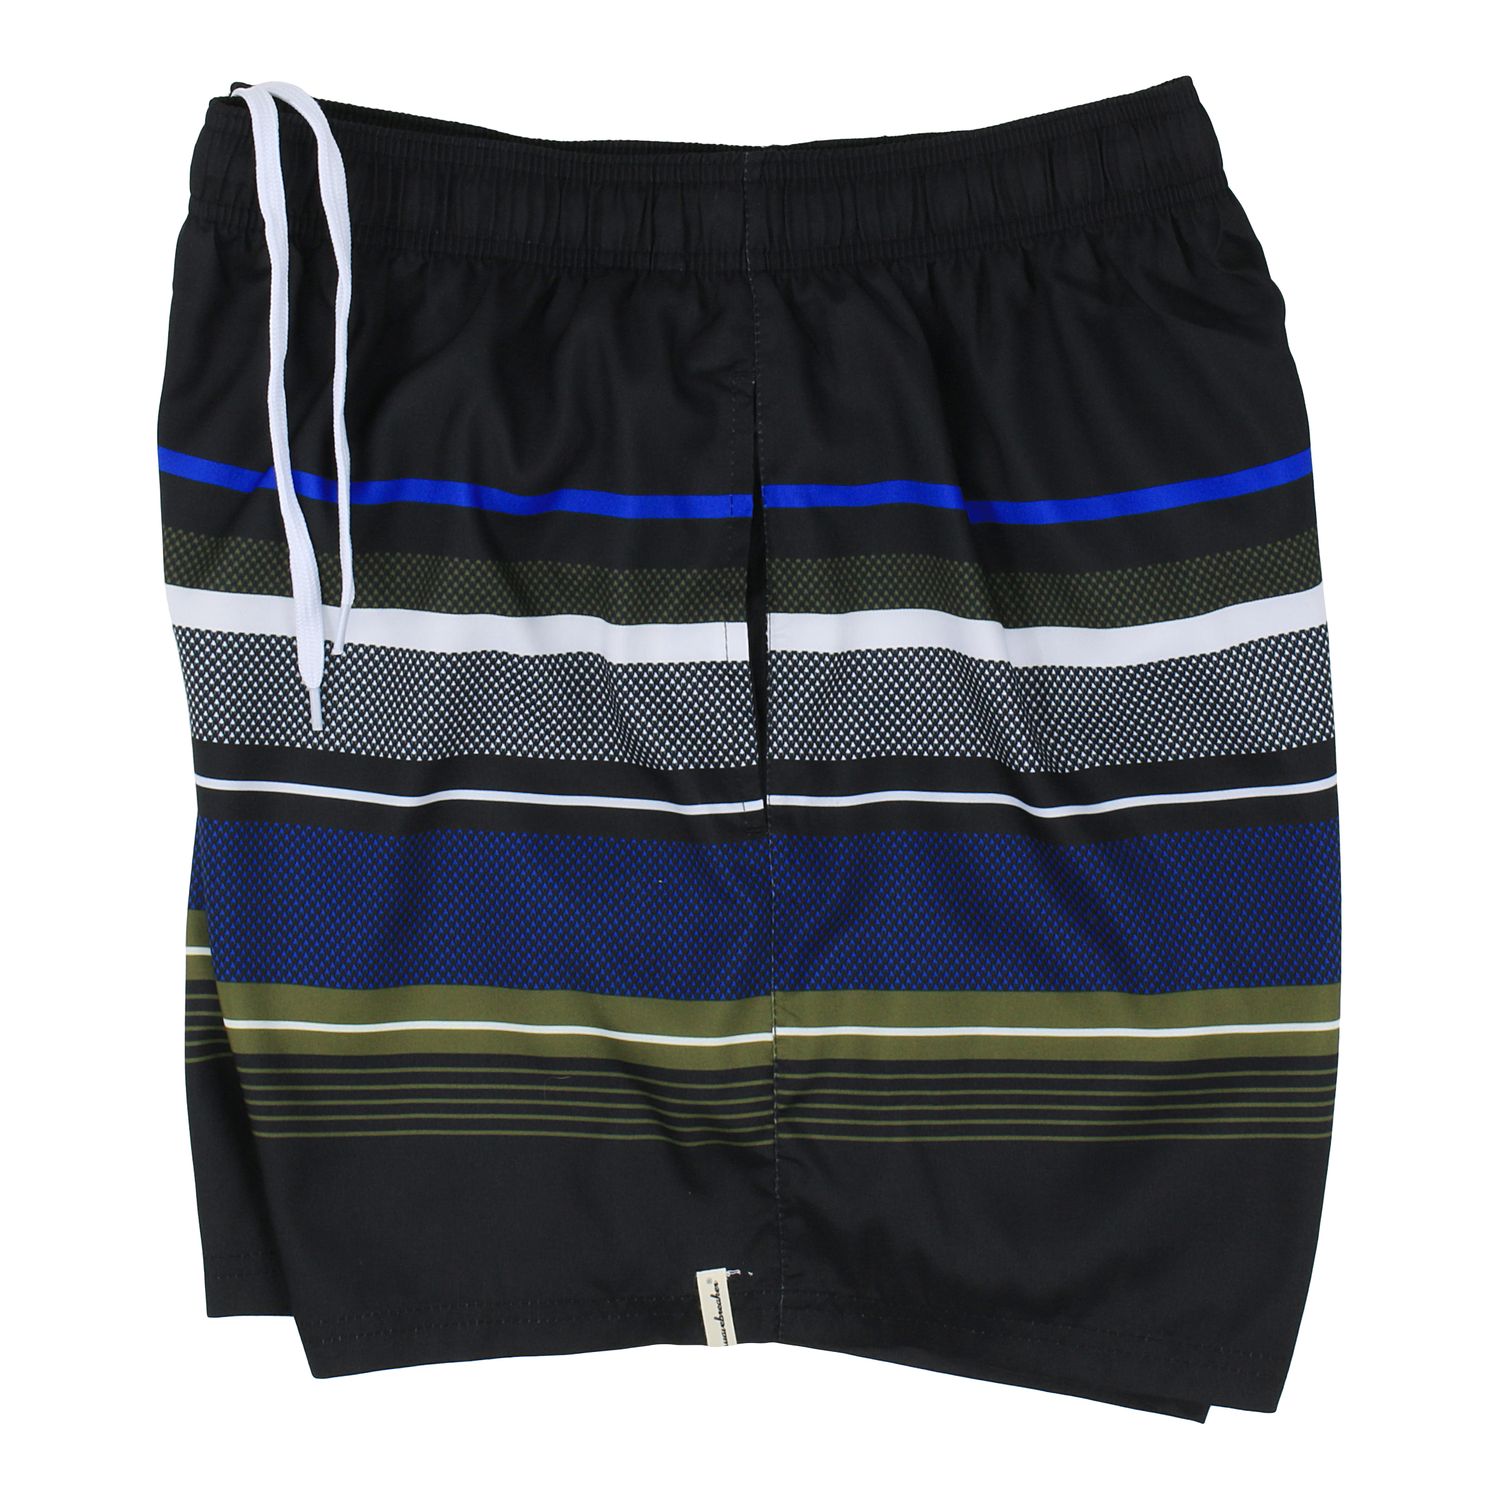 Swimming trunks by Wavebreaker up to oversize 8XL/ black-blue-olive green- white striped